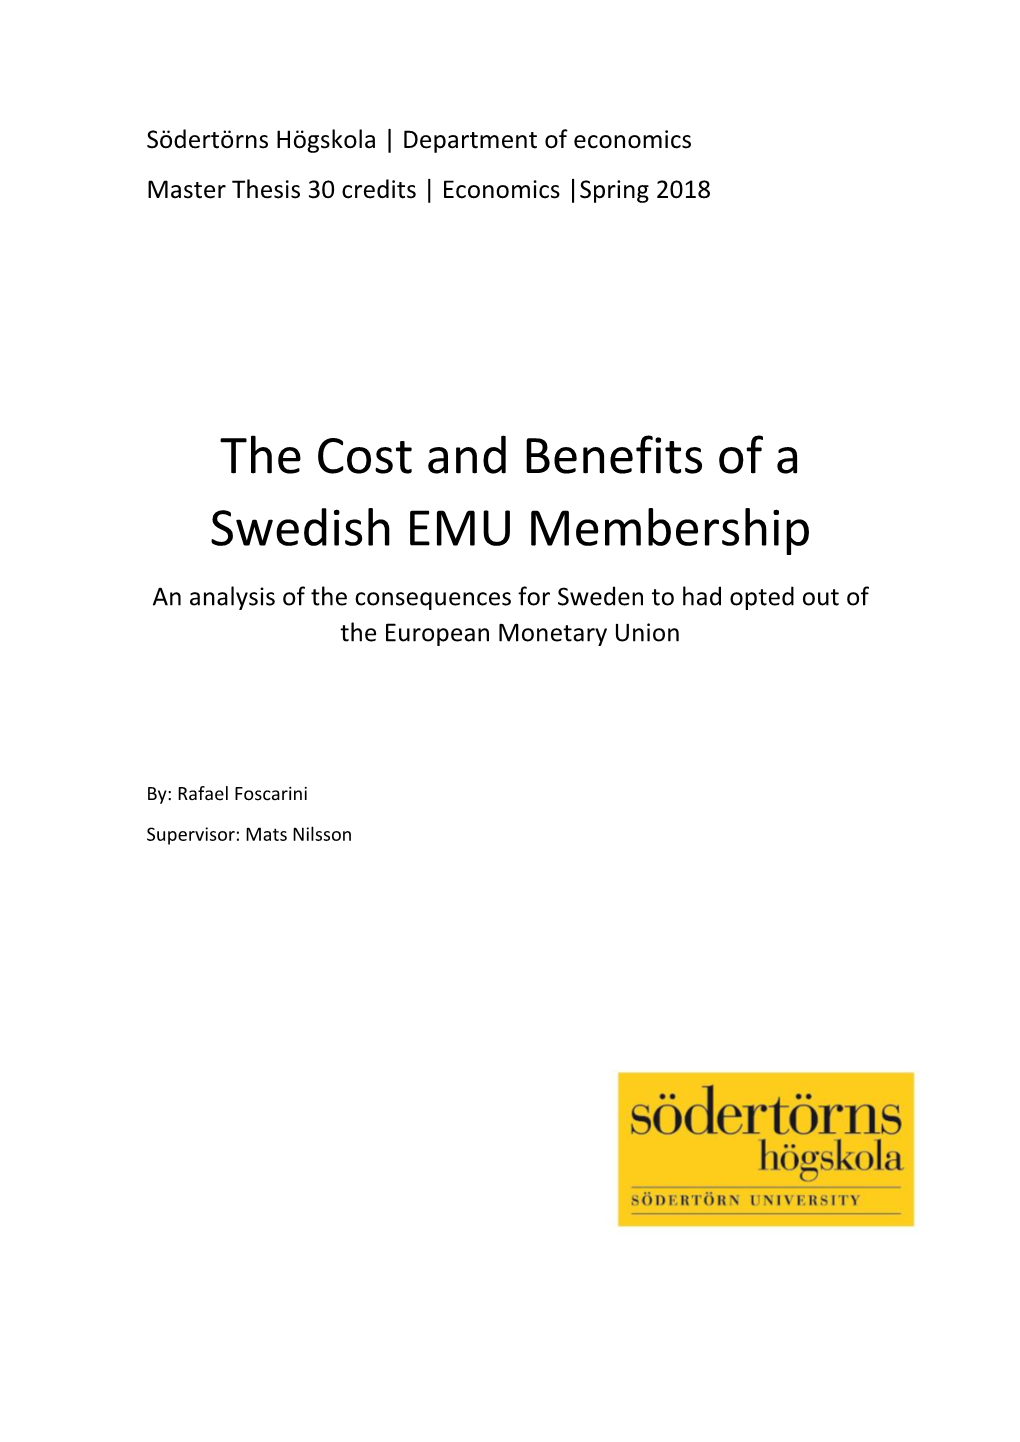 The Cost and Benefits of a Swedish EMU Membership an Analysis of the Consequences for Sweden to Had Opted out of the European Monetary Union